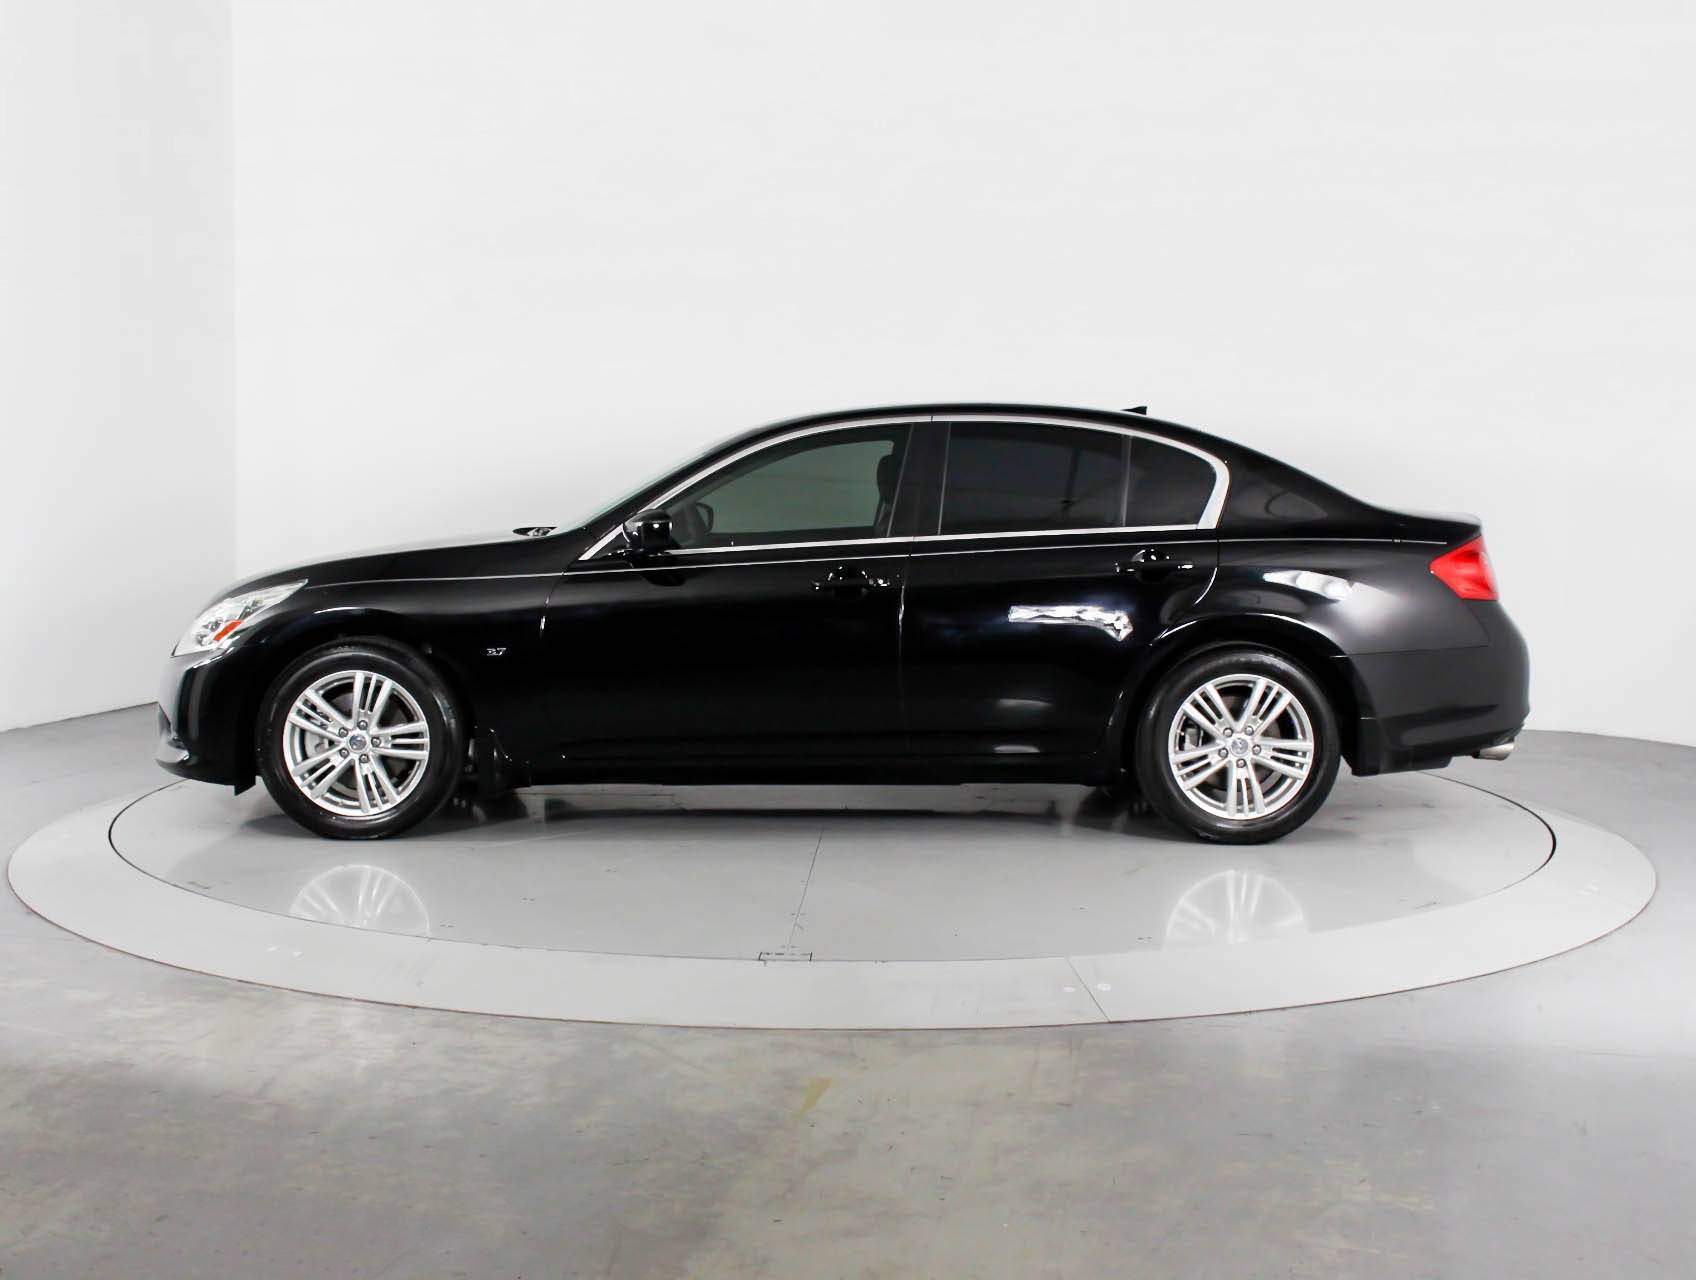 Used 2015 INFINITI Q40 for sale in WEST PALM | 90802